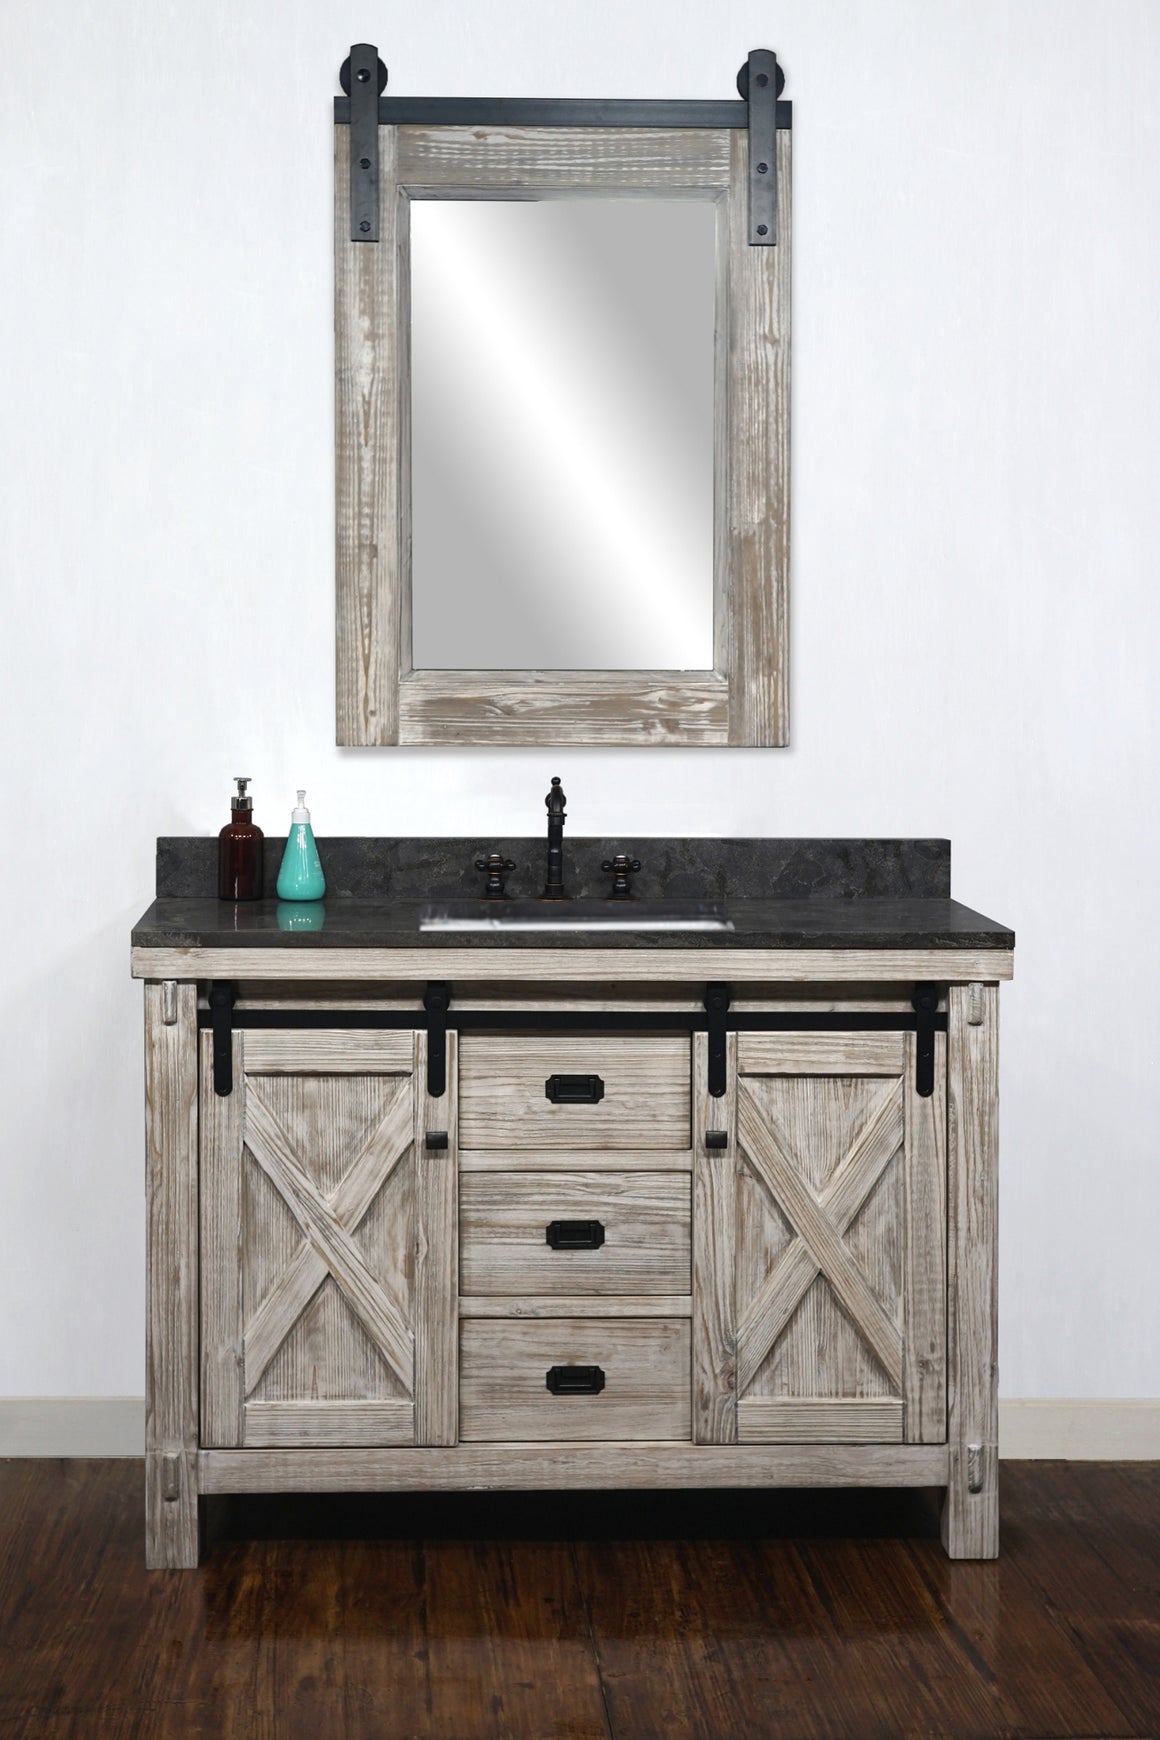 48"RUSTIC SOLID FIR BARN DOOR STYLE SINGLE SINK VANITY IN WHITE WASH WITH LIMESTONE TOP WITH RECTANGULAR SINK-NO FAUCET